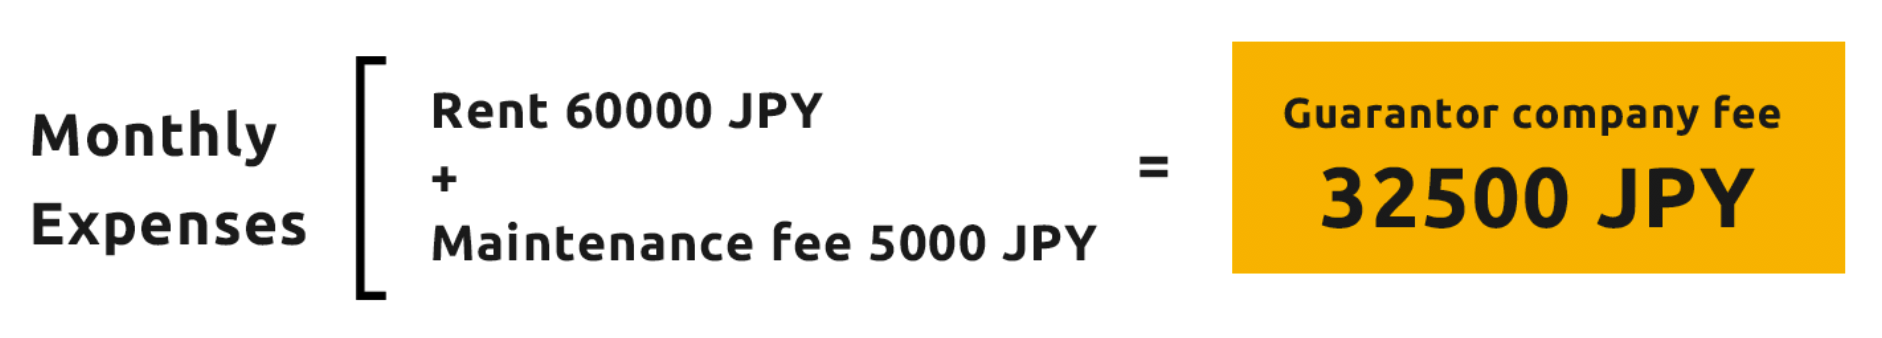 Monthly Expenses （Rent 60000 JPY+Maintenance fee 5000 JPY）=Guarantor company fee 32500 JPY